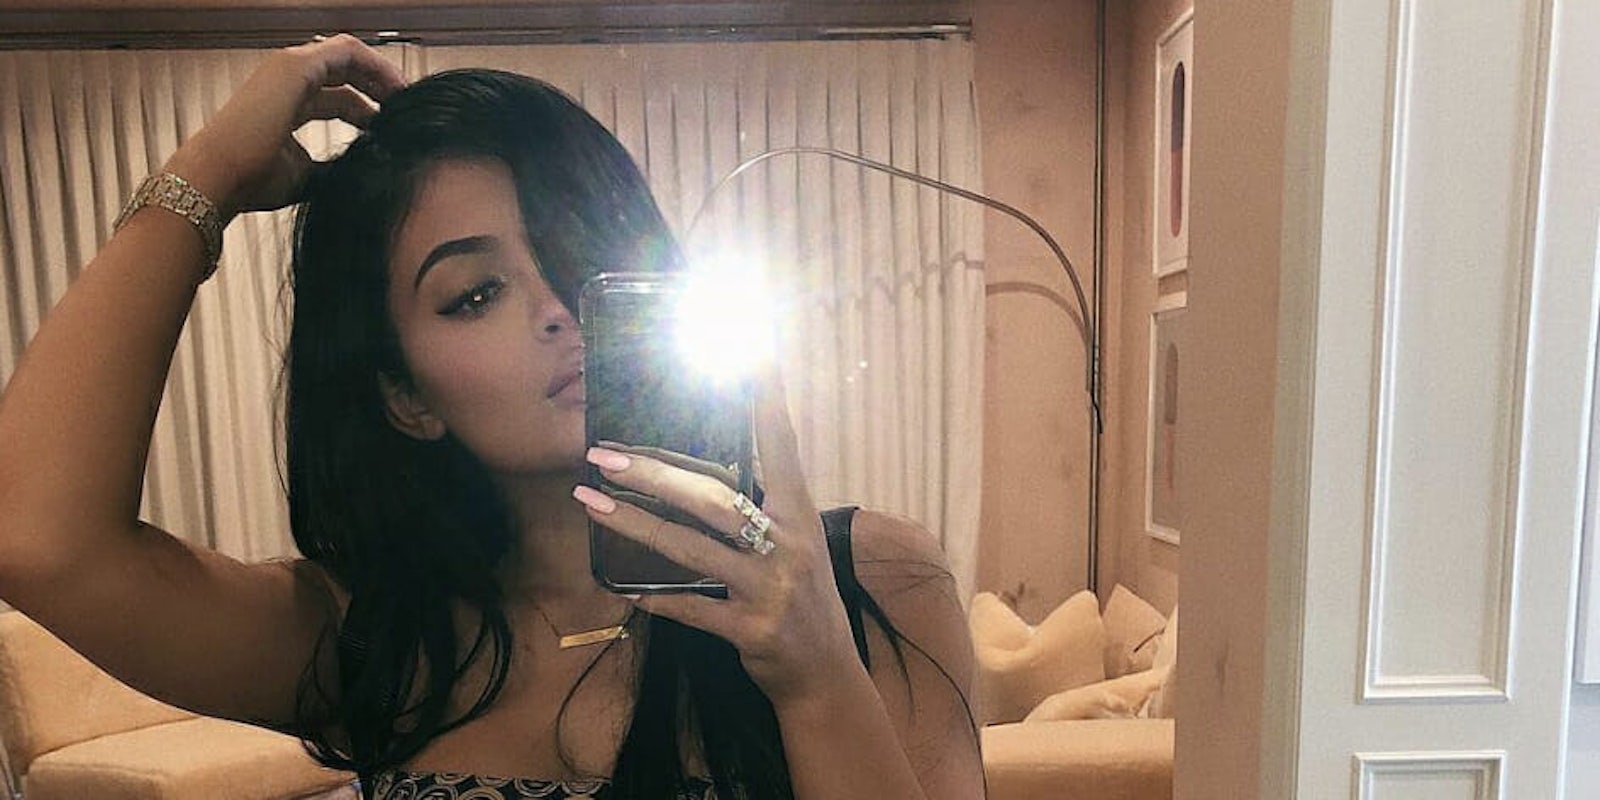 Kylie Jenner's Instagram posts are worth $1 million each.